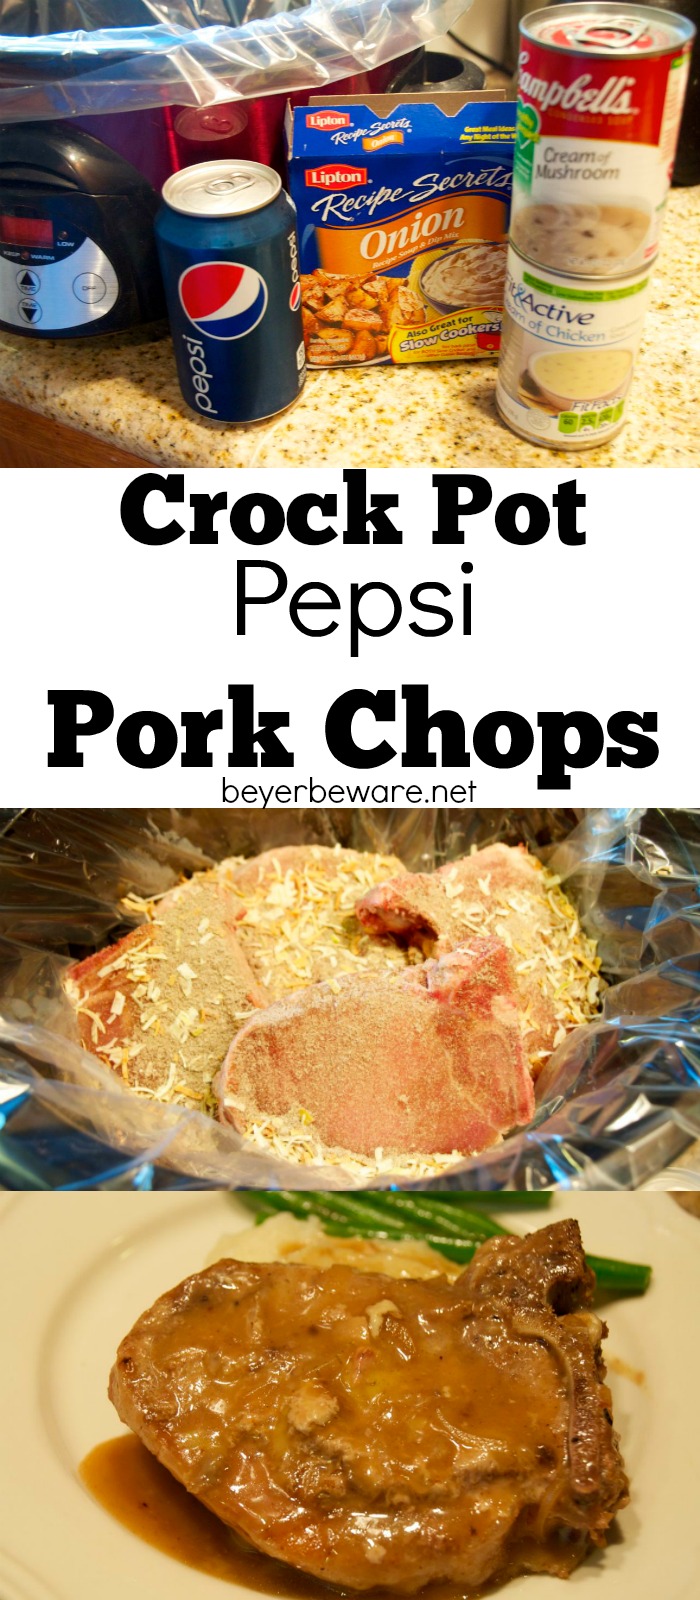 Sweet and savory pork chops are what you will get with this crock pot Pepsi pork chops recipe.